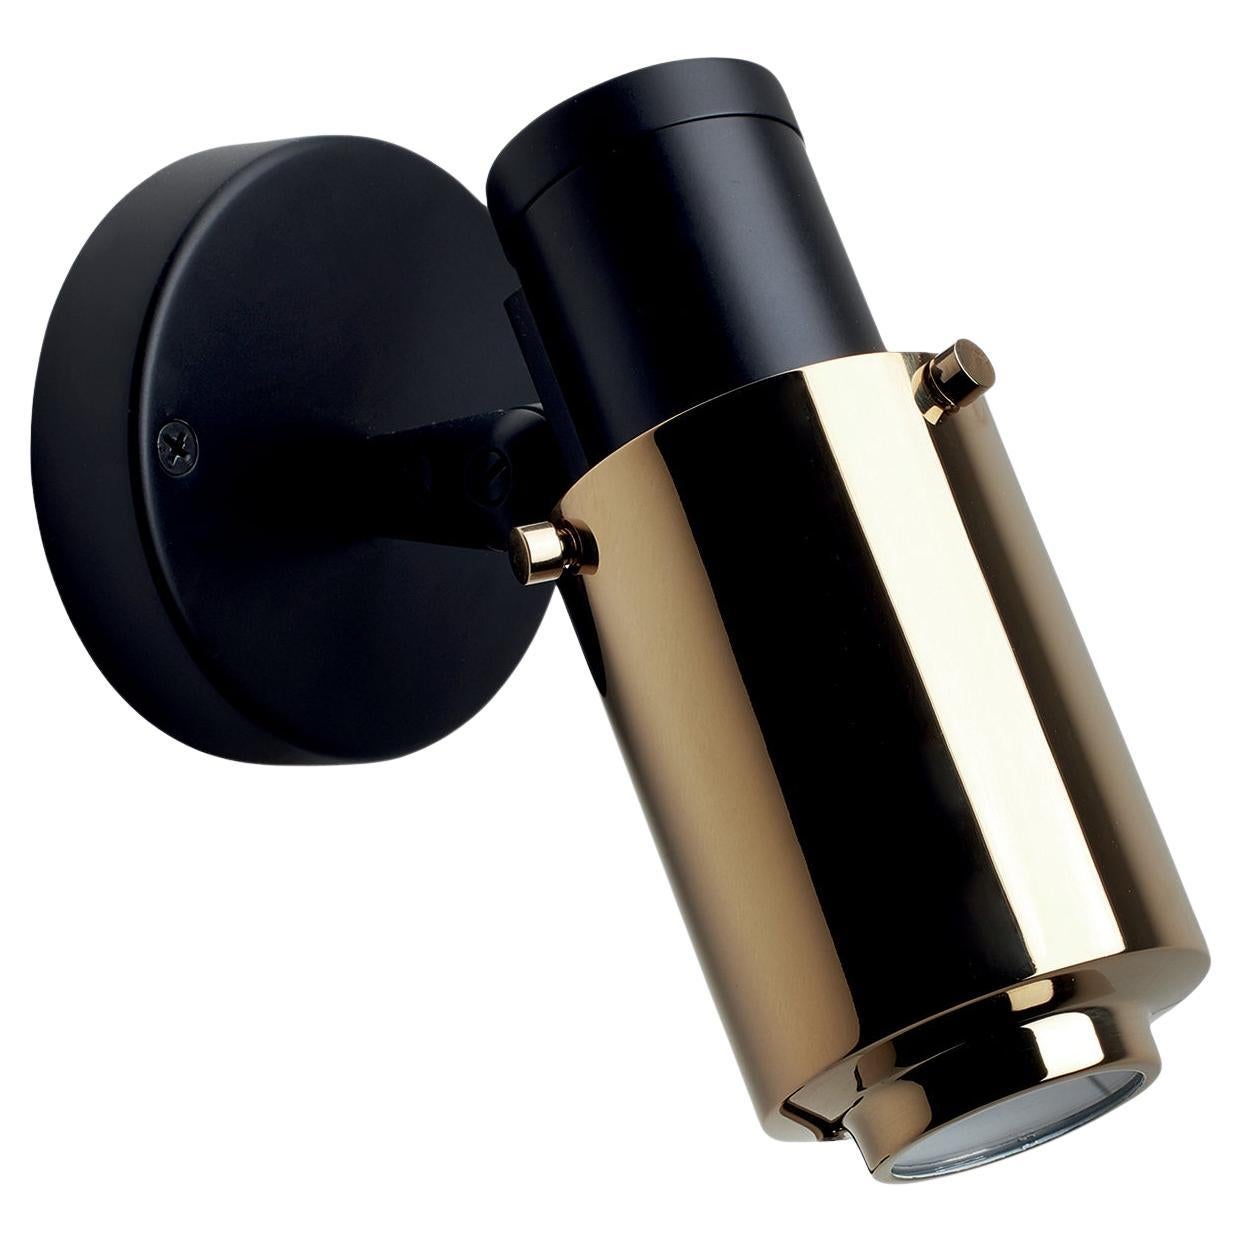 DCW Editions Biny Spot Bulb Wall Lamp in Black-Gold Steel & Aluminium w/o Stick For Sale